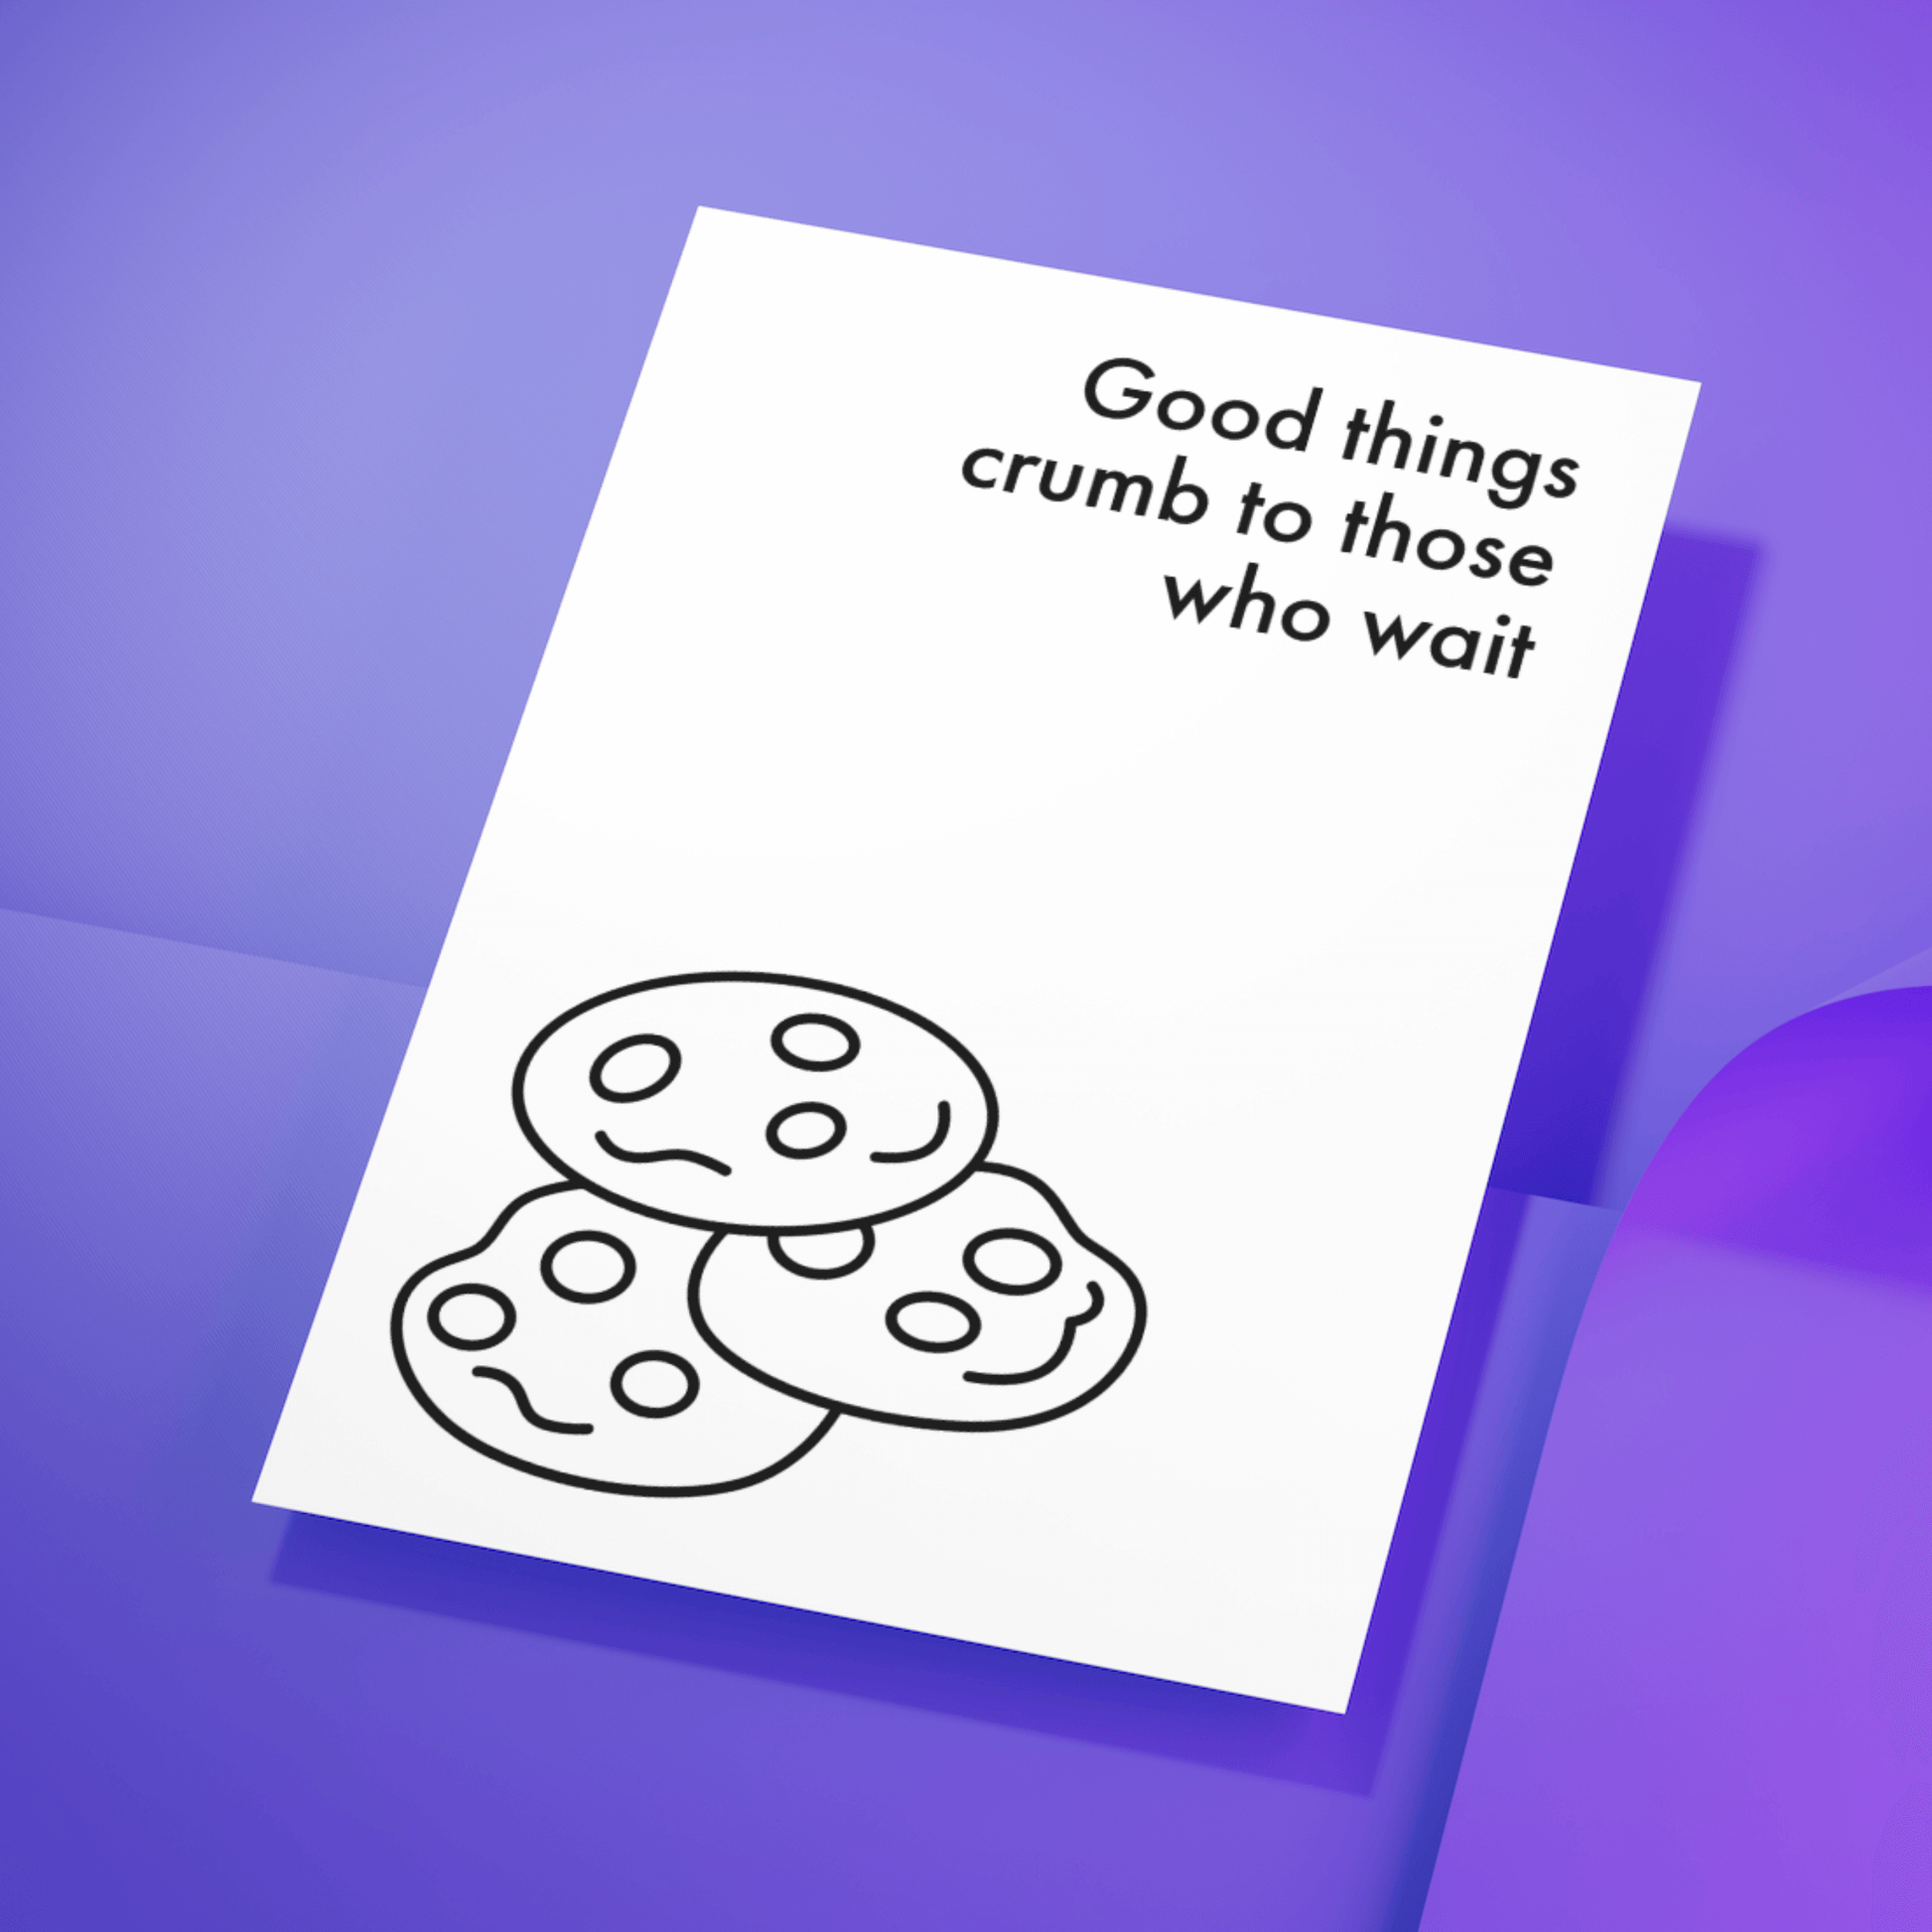 Little Kraken's Good Things Crumb to Those Who Wait, Congratulations Cards for £3.50 each